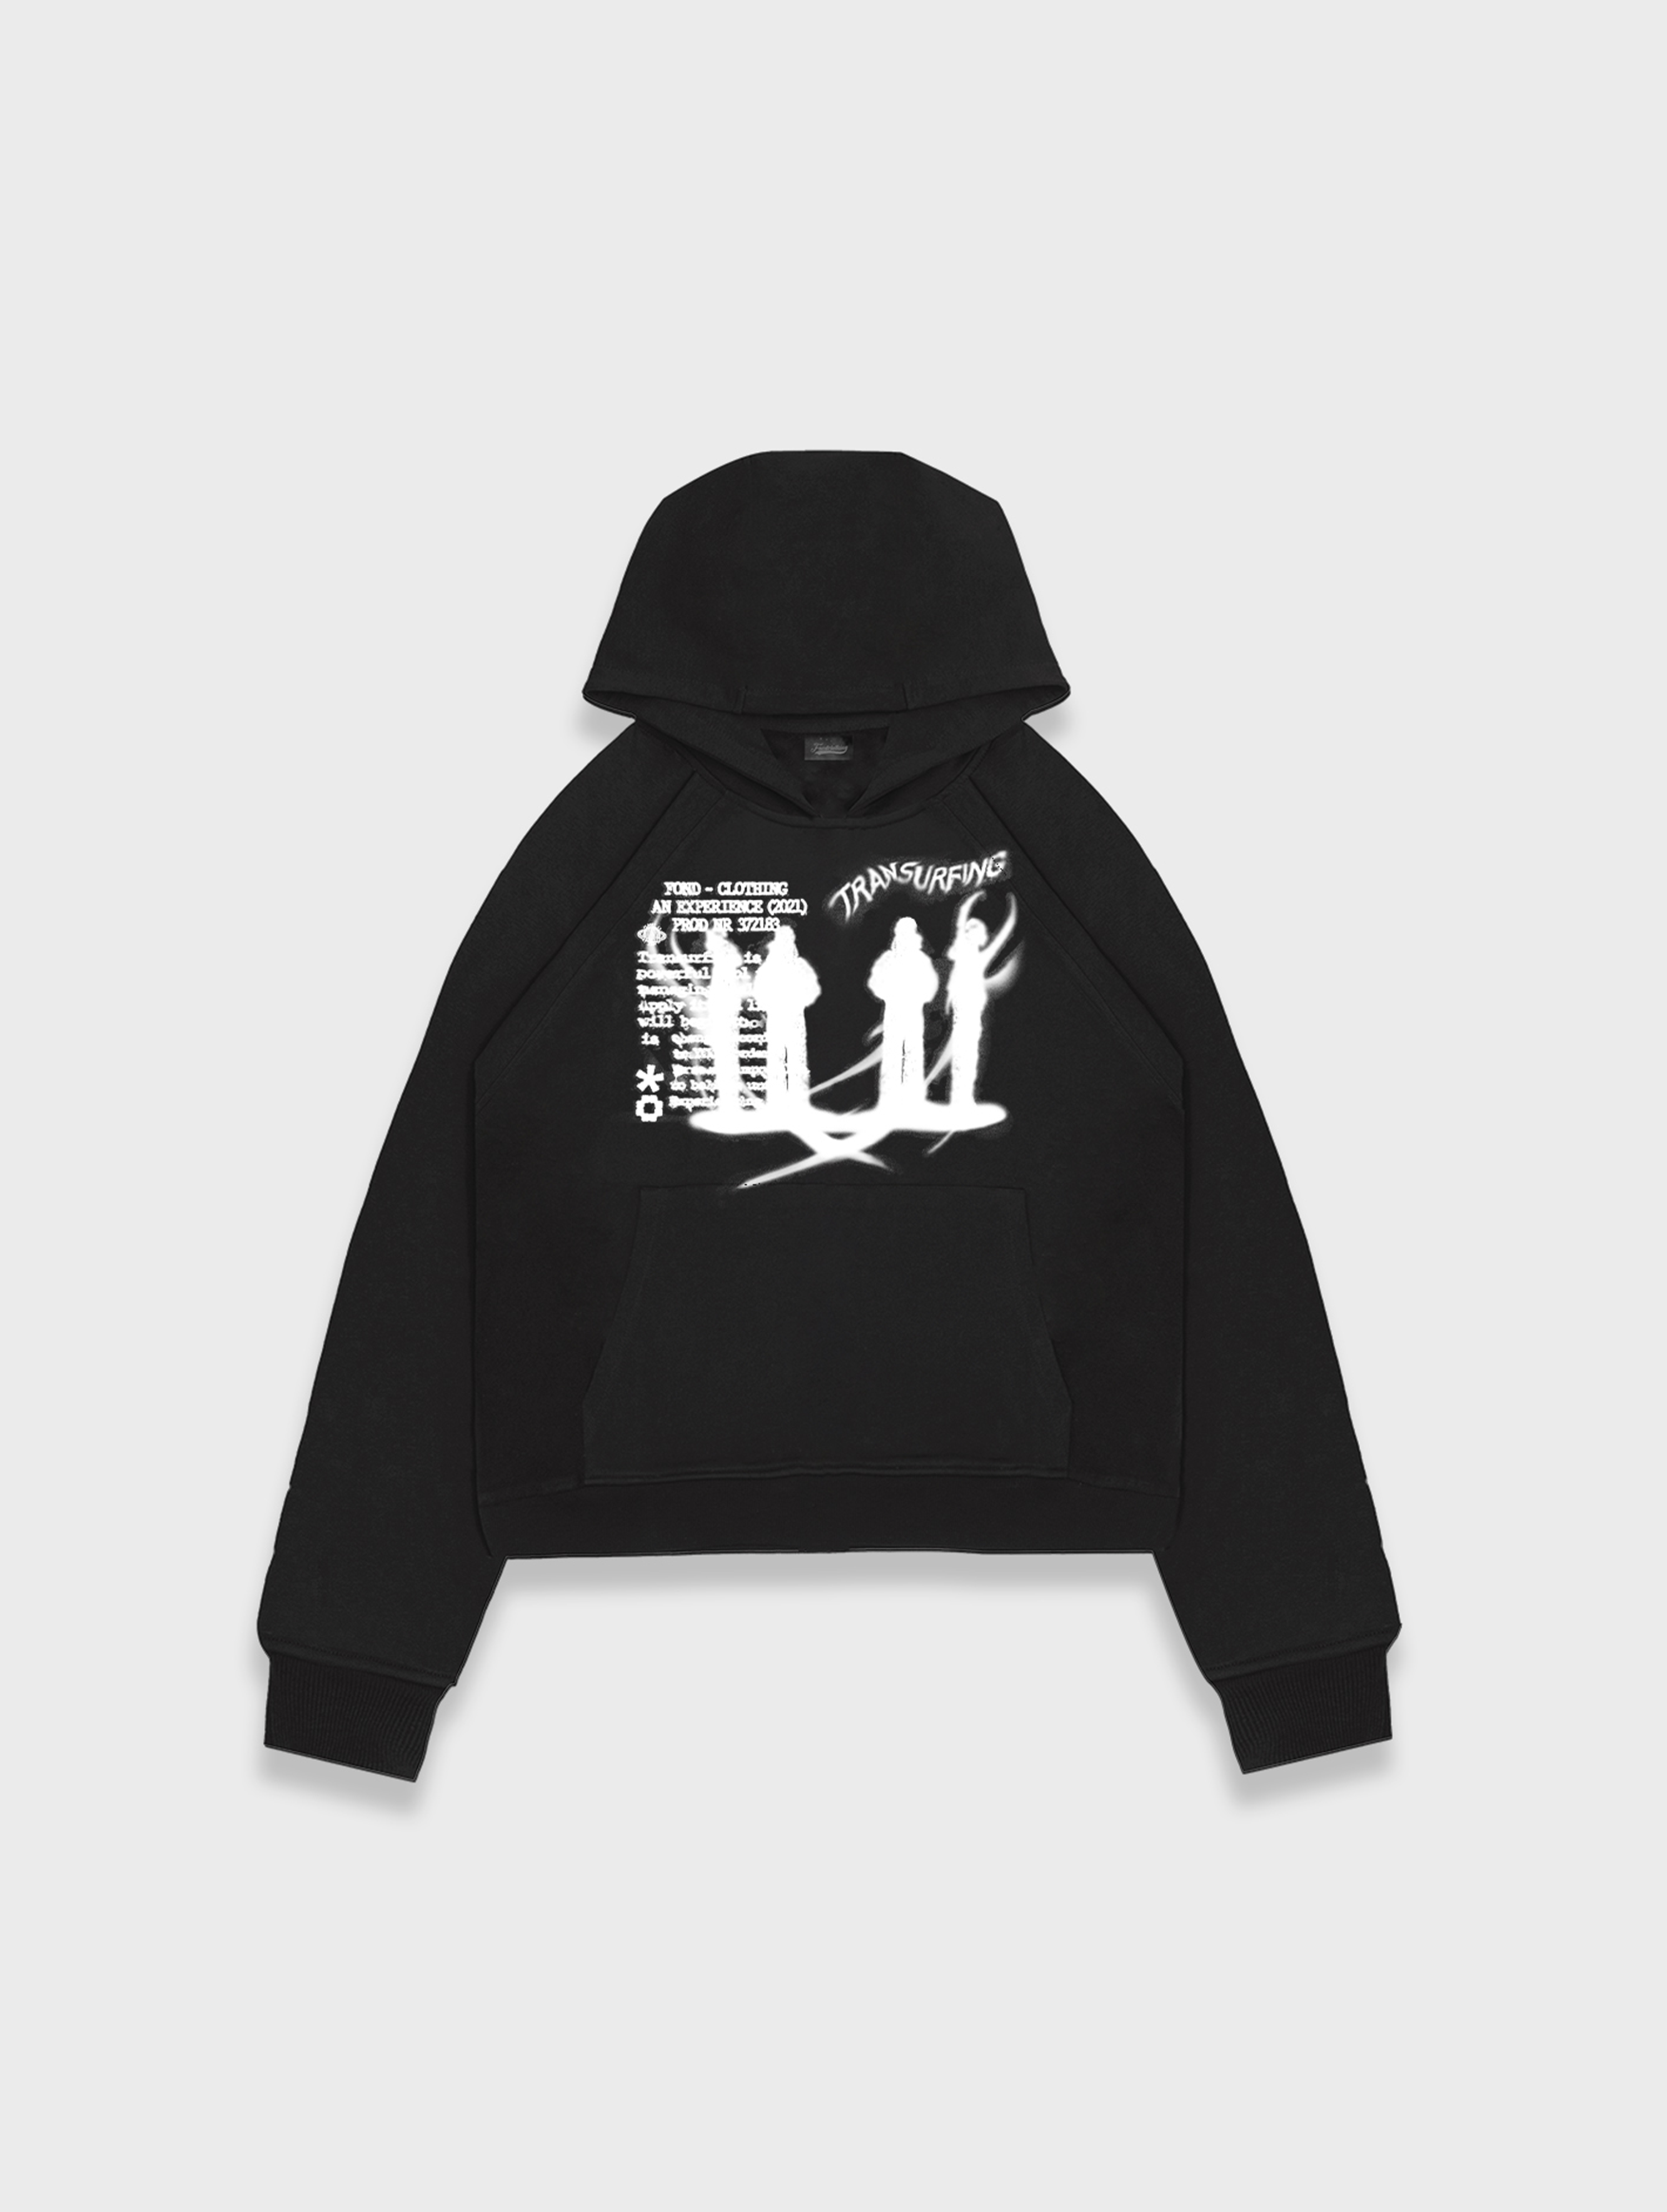 Transition into Reality Hoodie